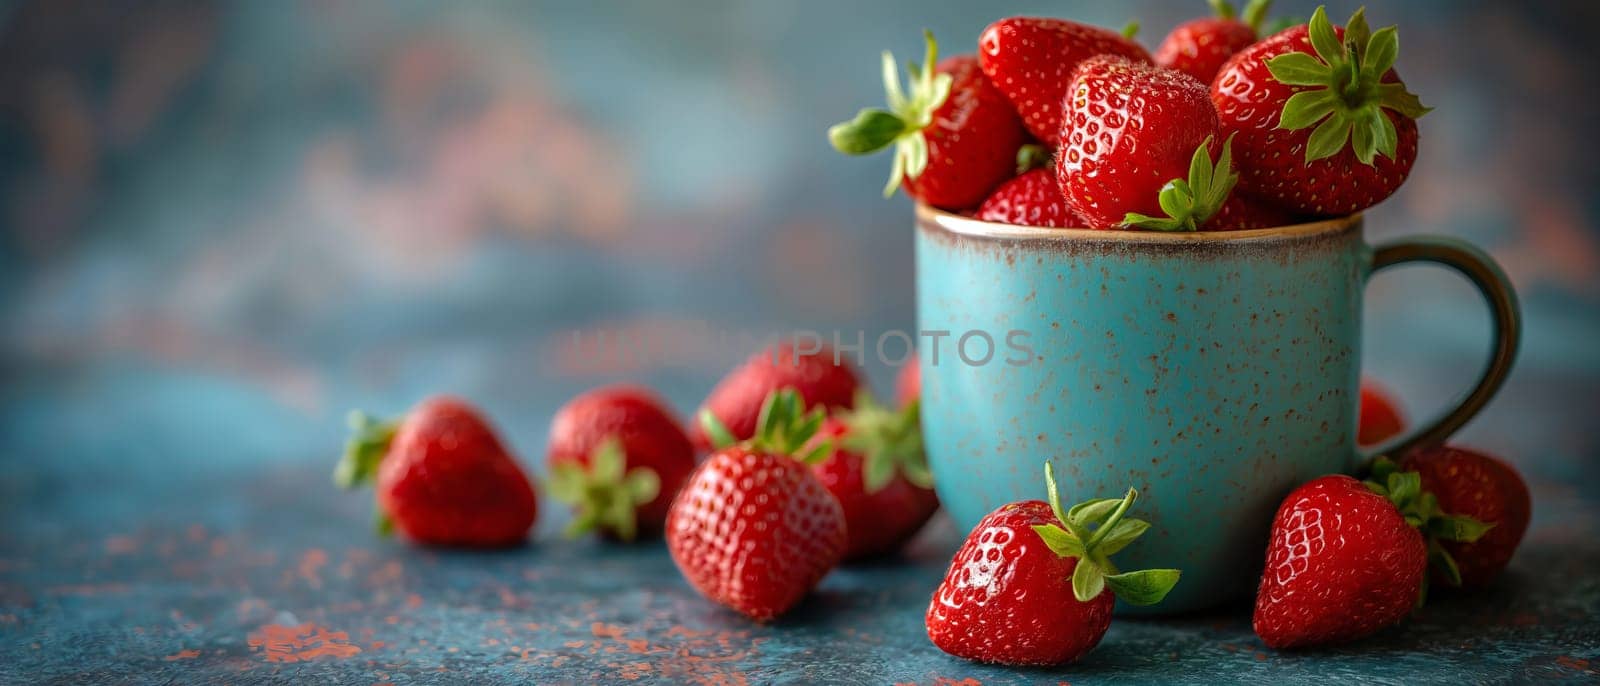 Ripe strawberries in a cup on a blurred background. by Fischeron